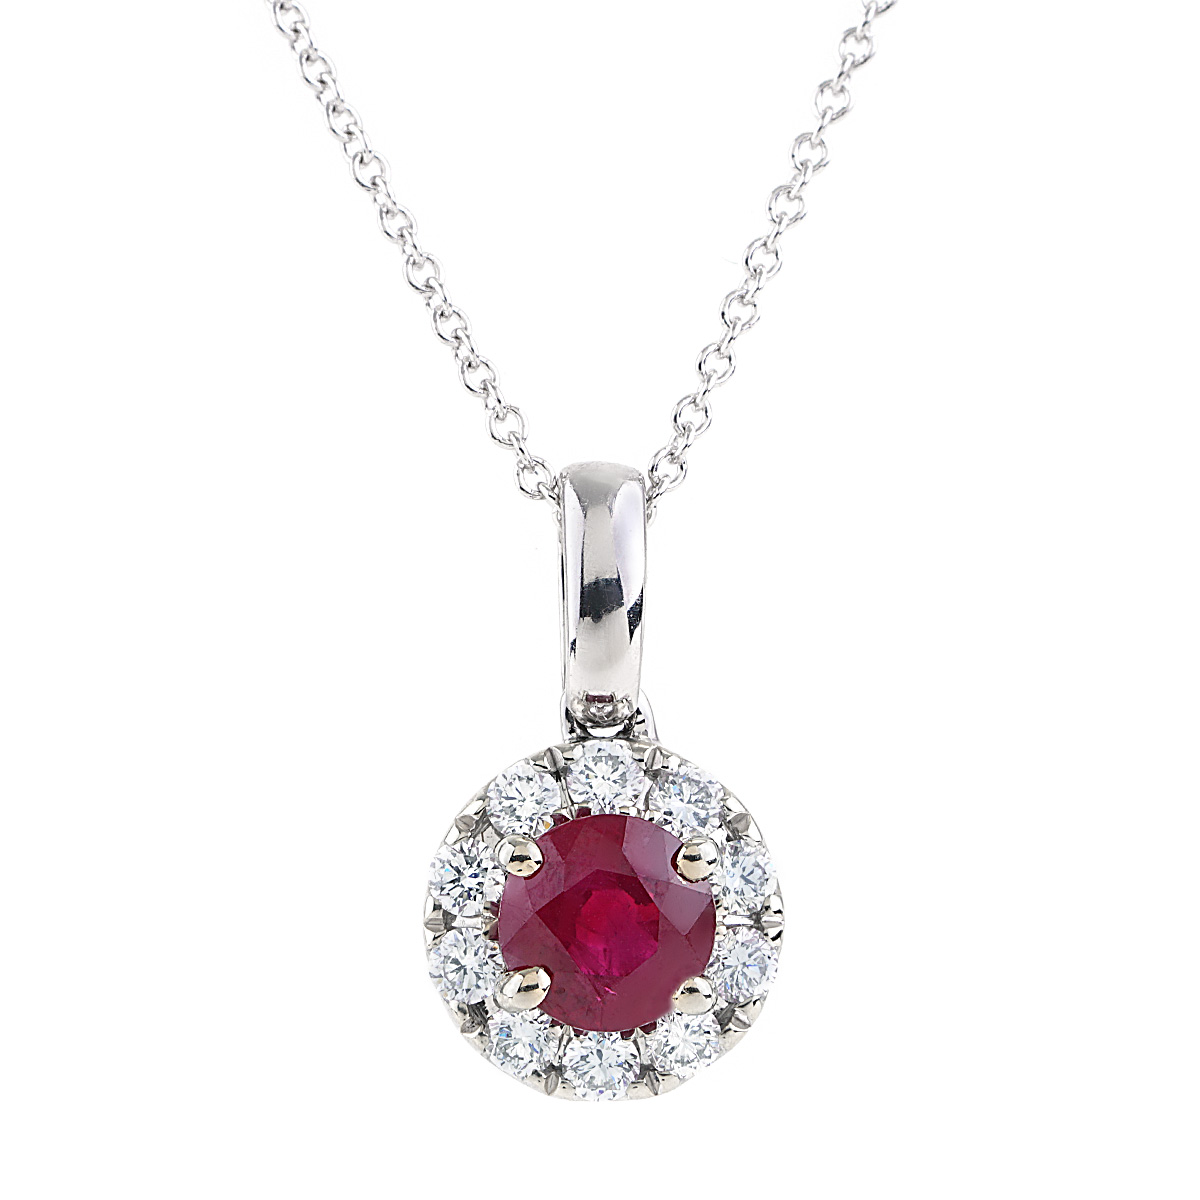 1.08 Cttw Round Ruby and Diamond Halo Pendant Necklace in White Gold